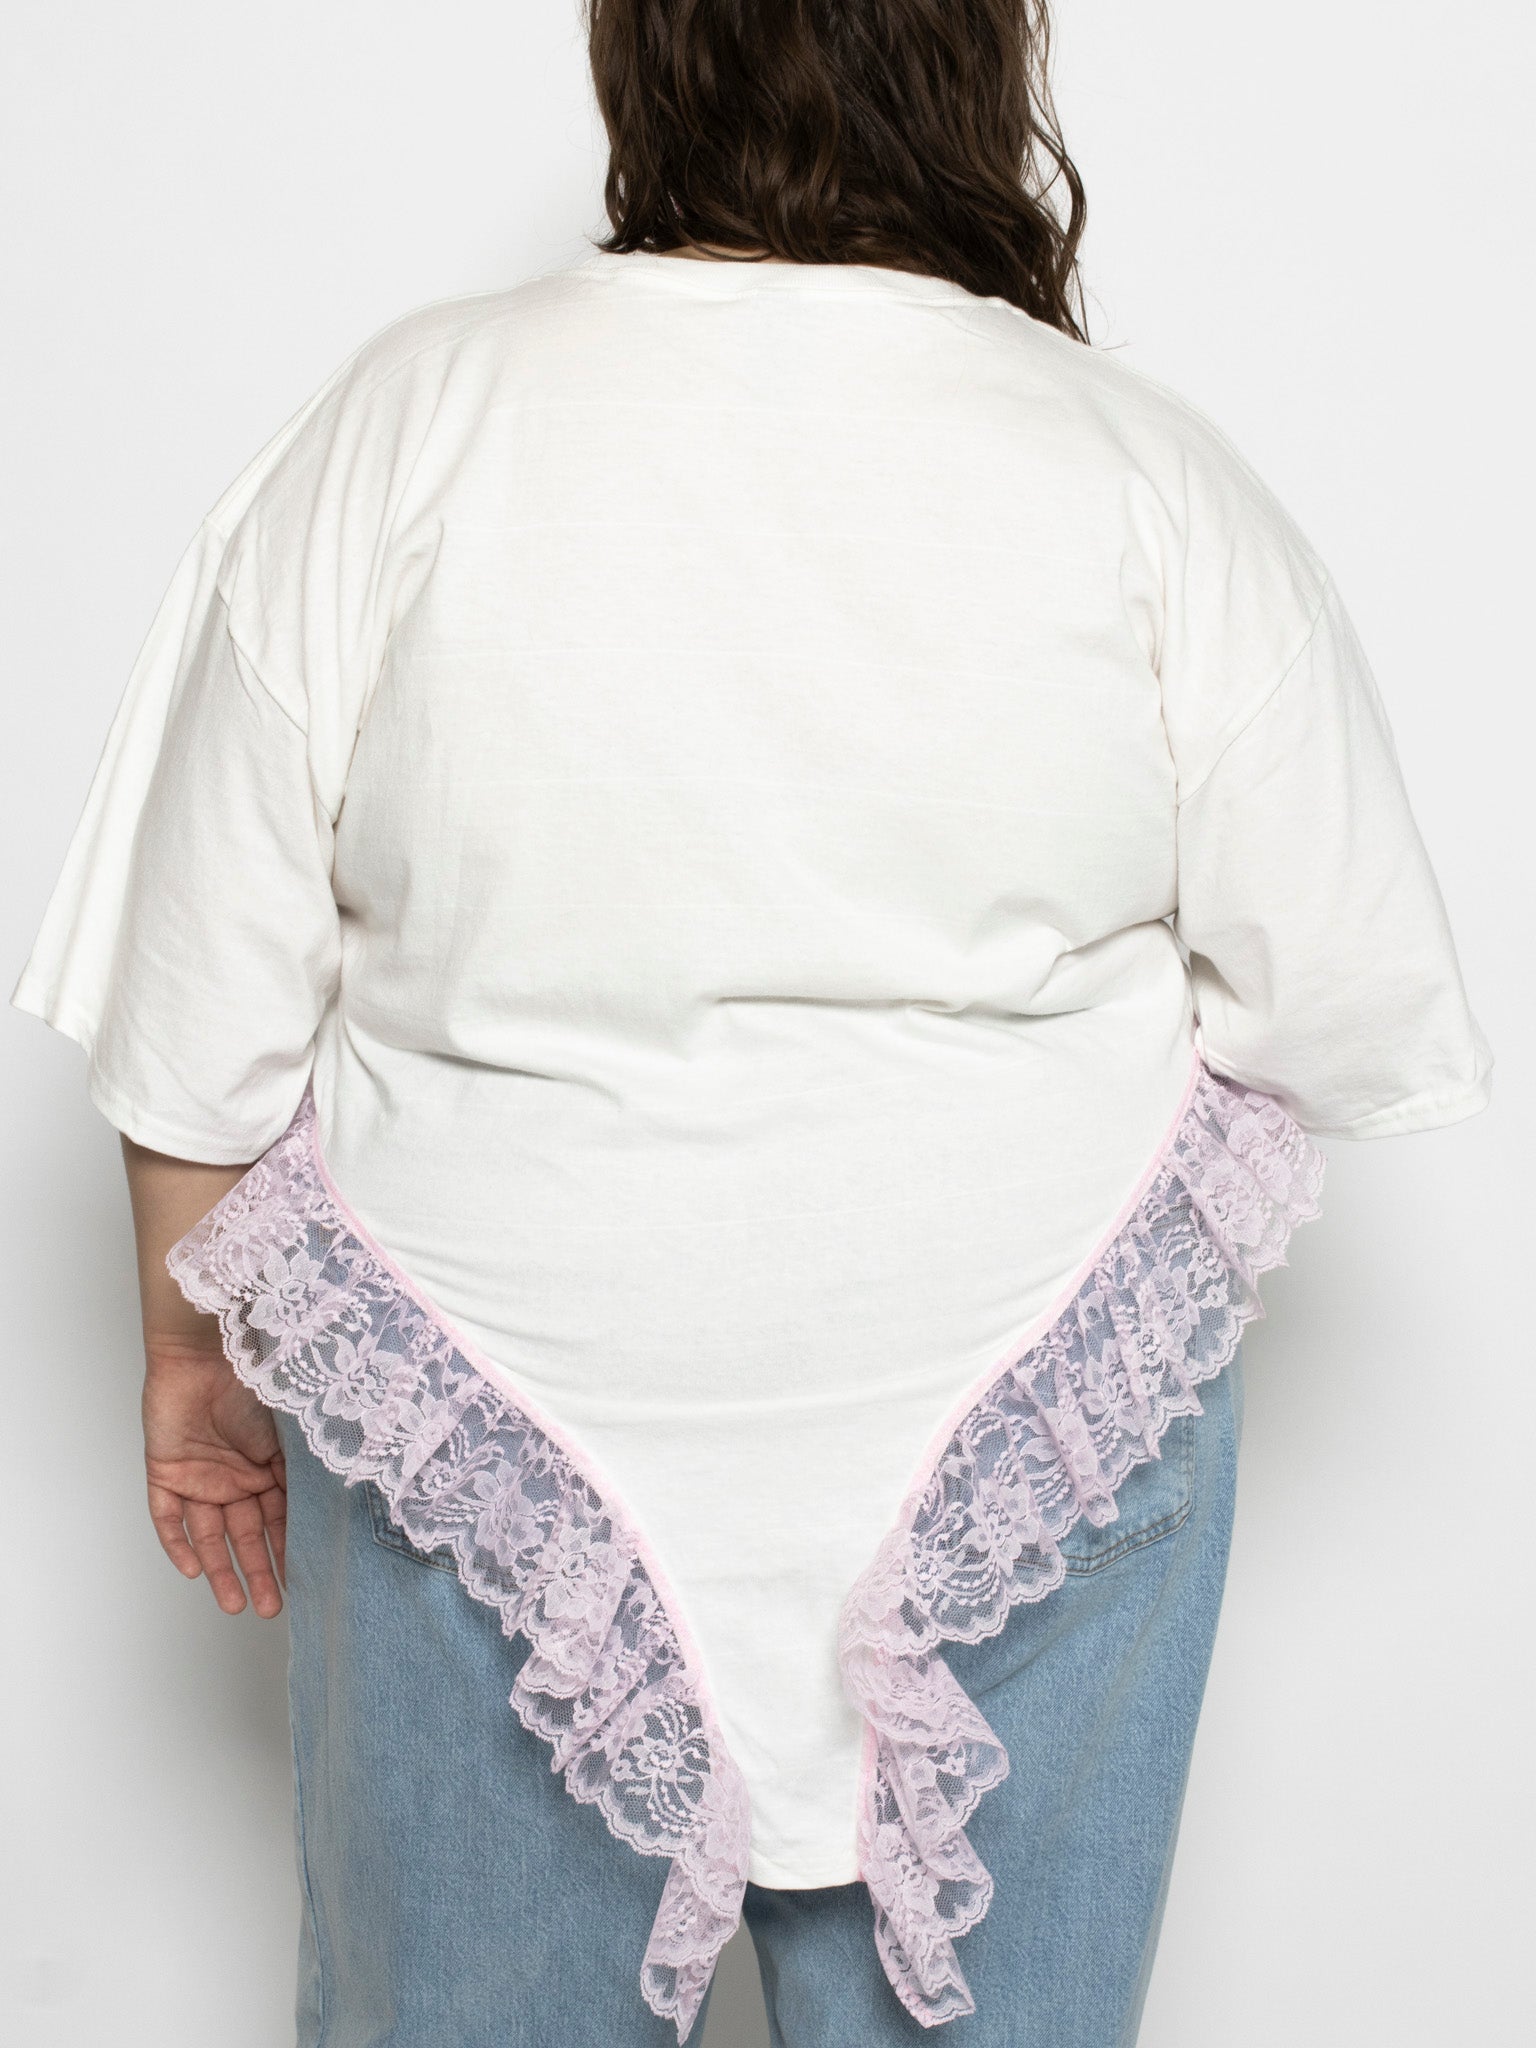 Shop Journal - White Negligee Tee with Pink Lace (3X)